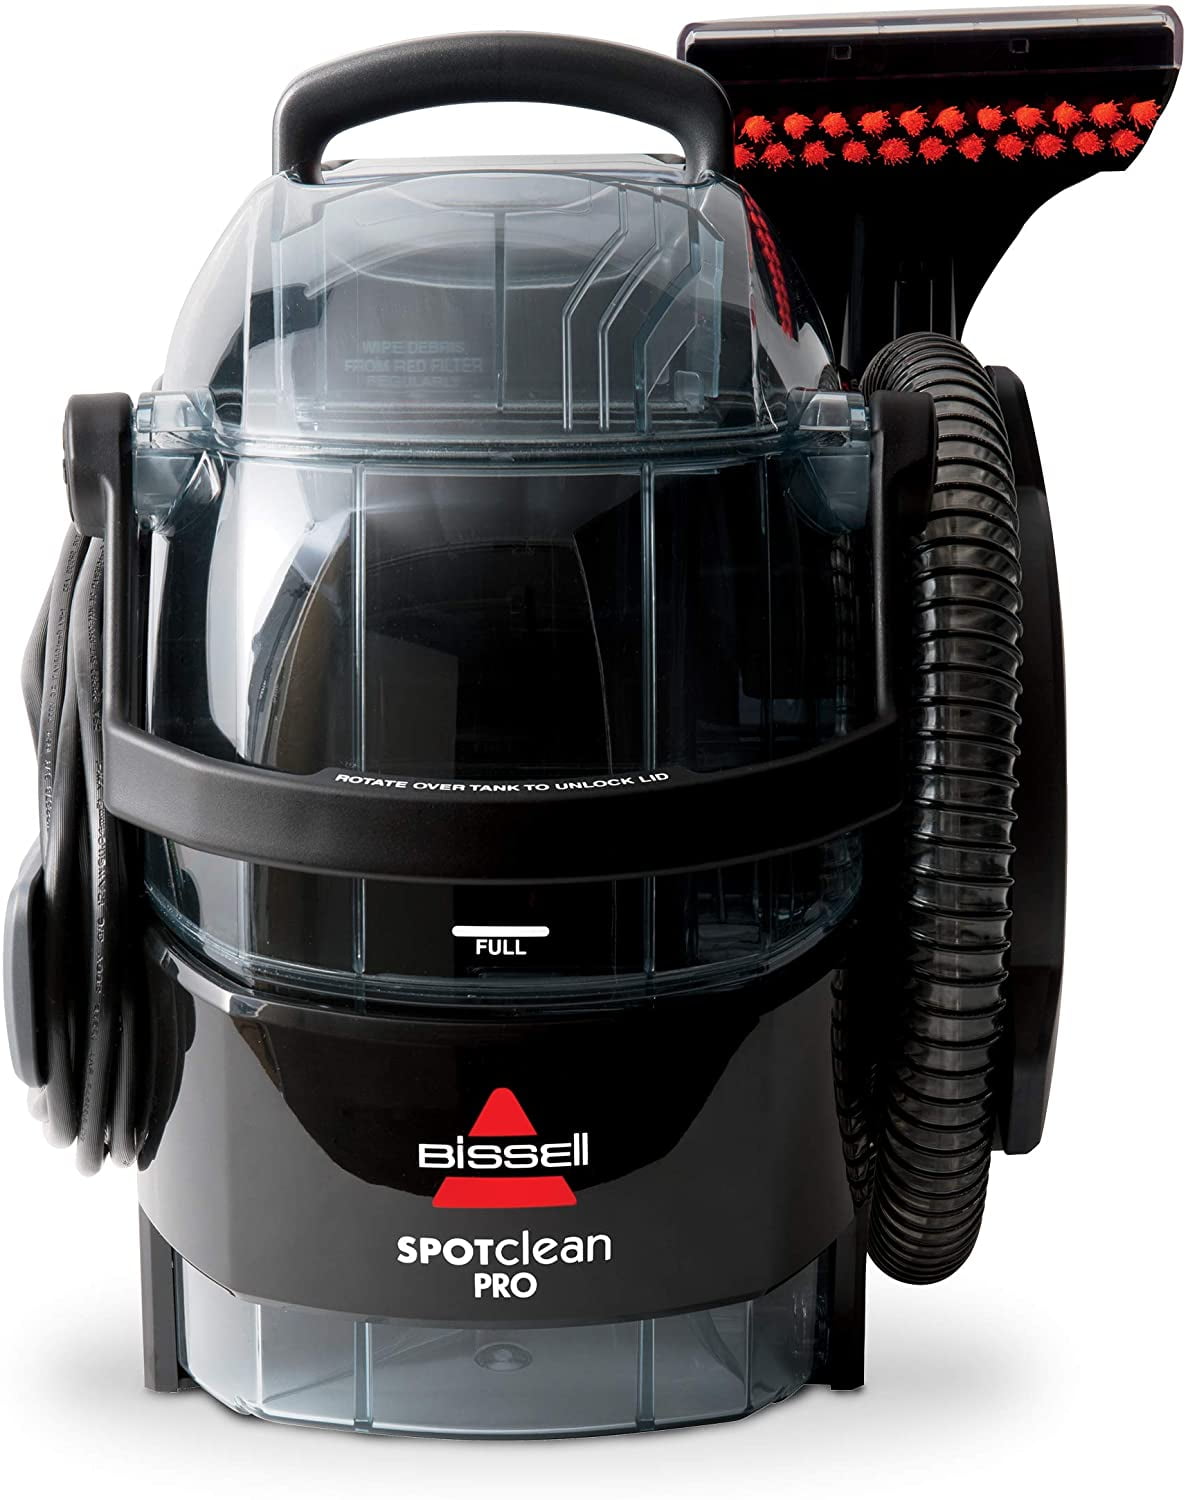 Black Corded Bissell 3624 Spot Clean Professional Portable Carpet Cleaner 